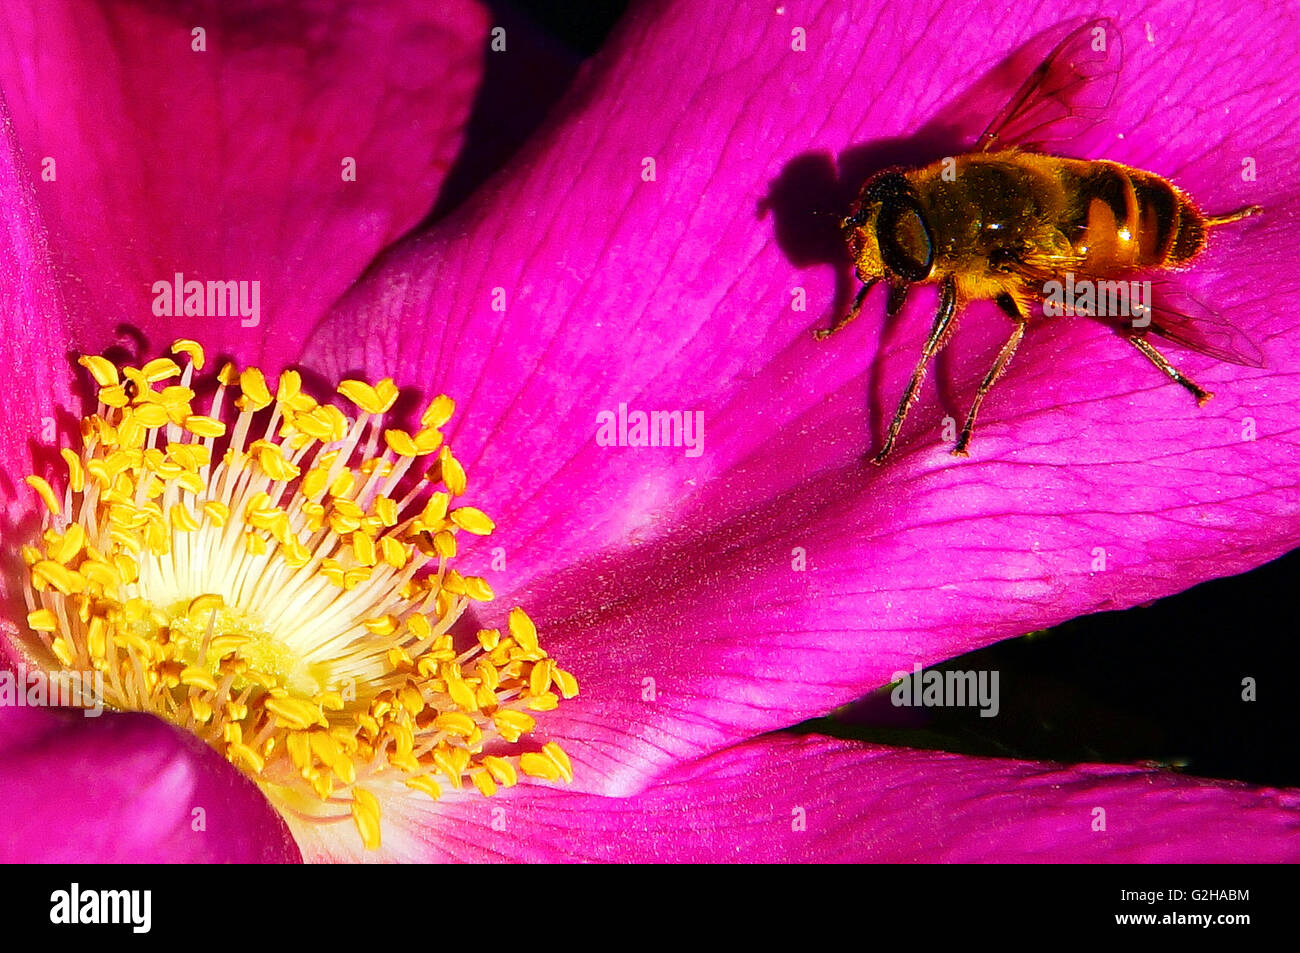 Honey bee on a pink camellia with bright yellow stamens Stock Photo